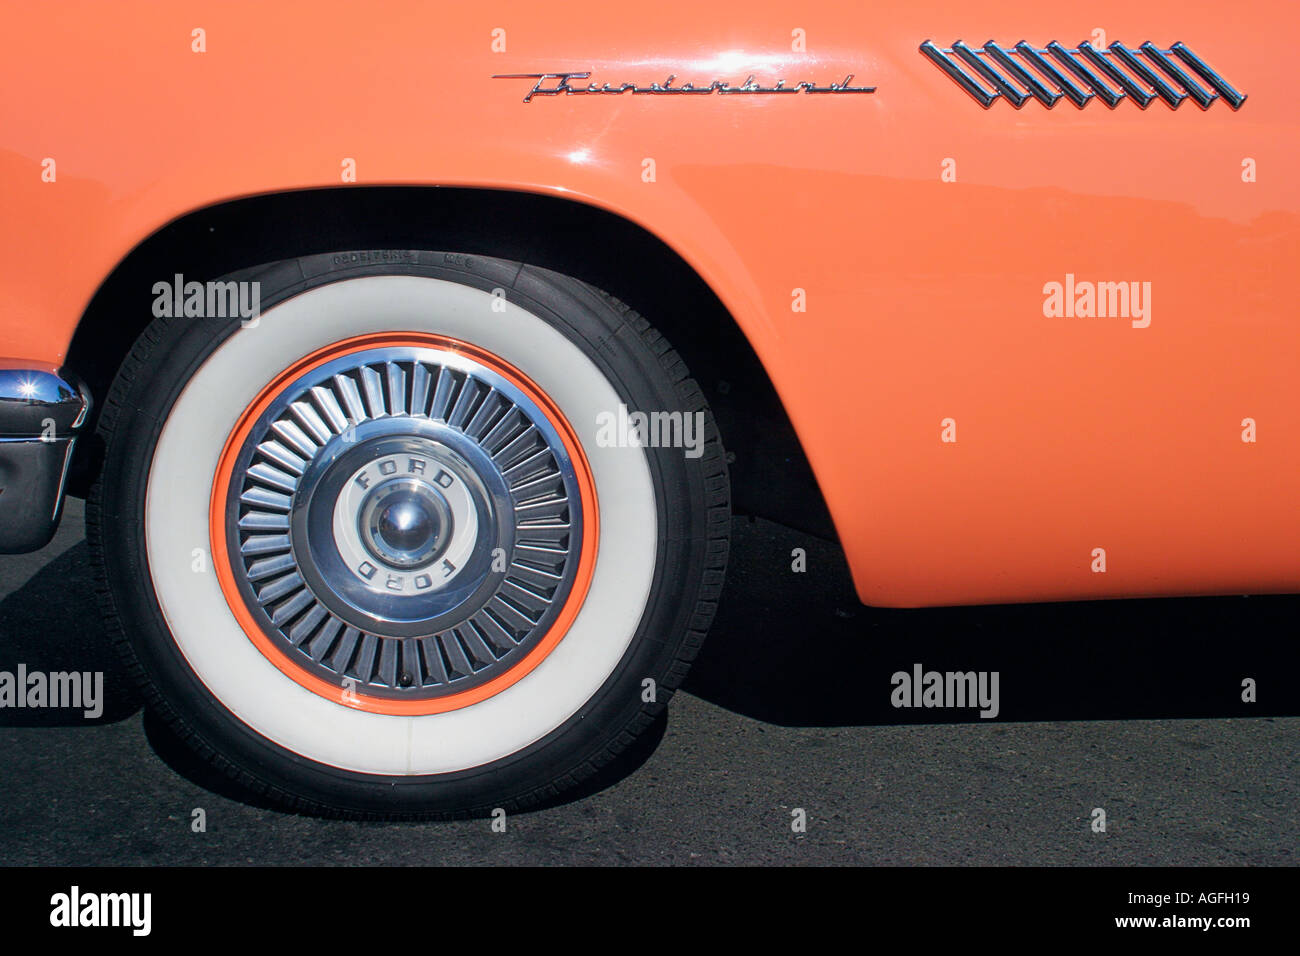 Closeup detail of tire and emblem on 1955 Ford Thunderbird automobile at classic car show Stock Photo